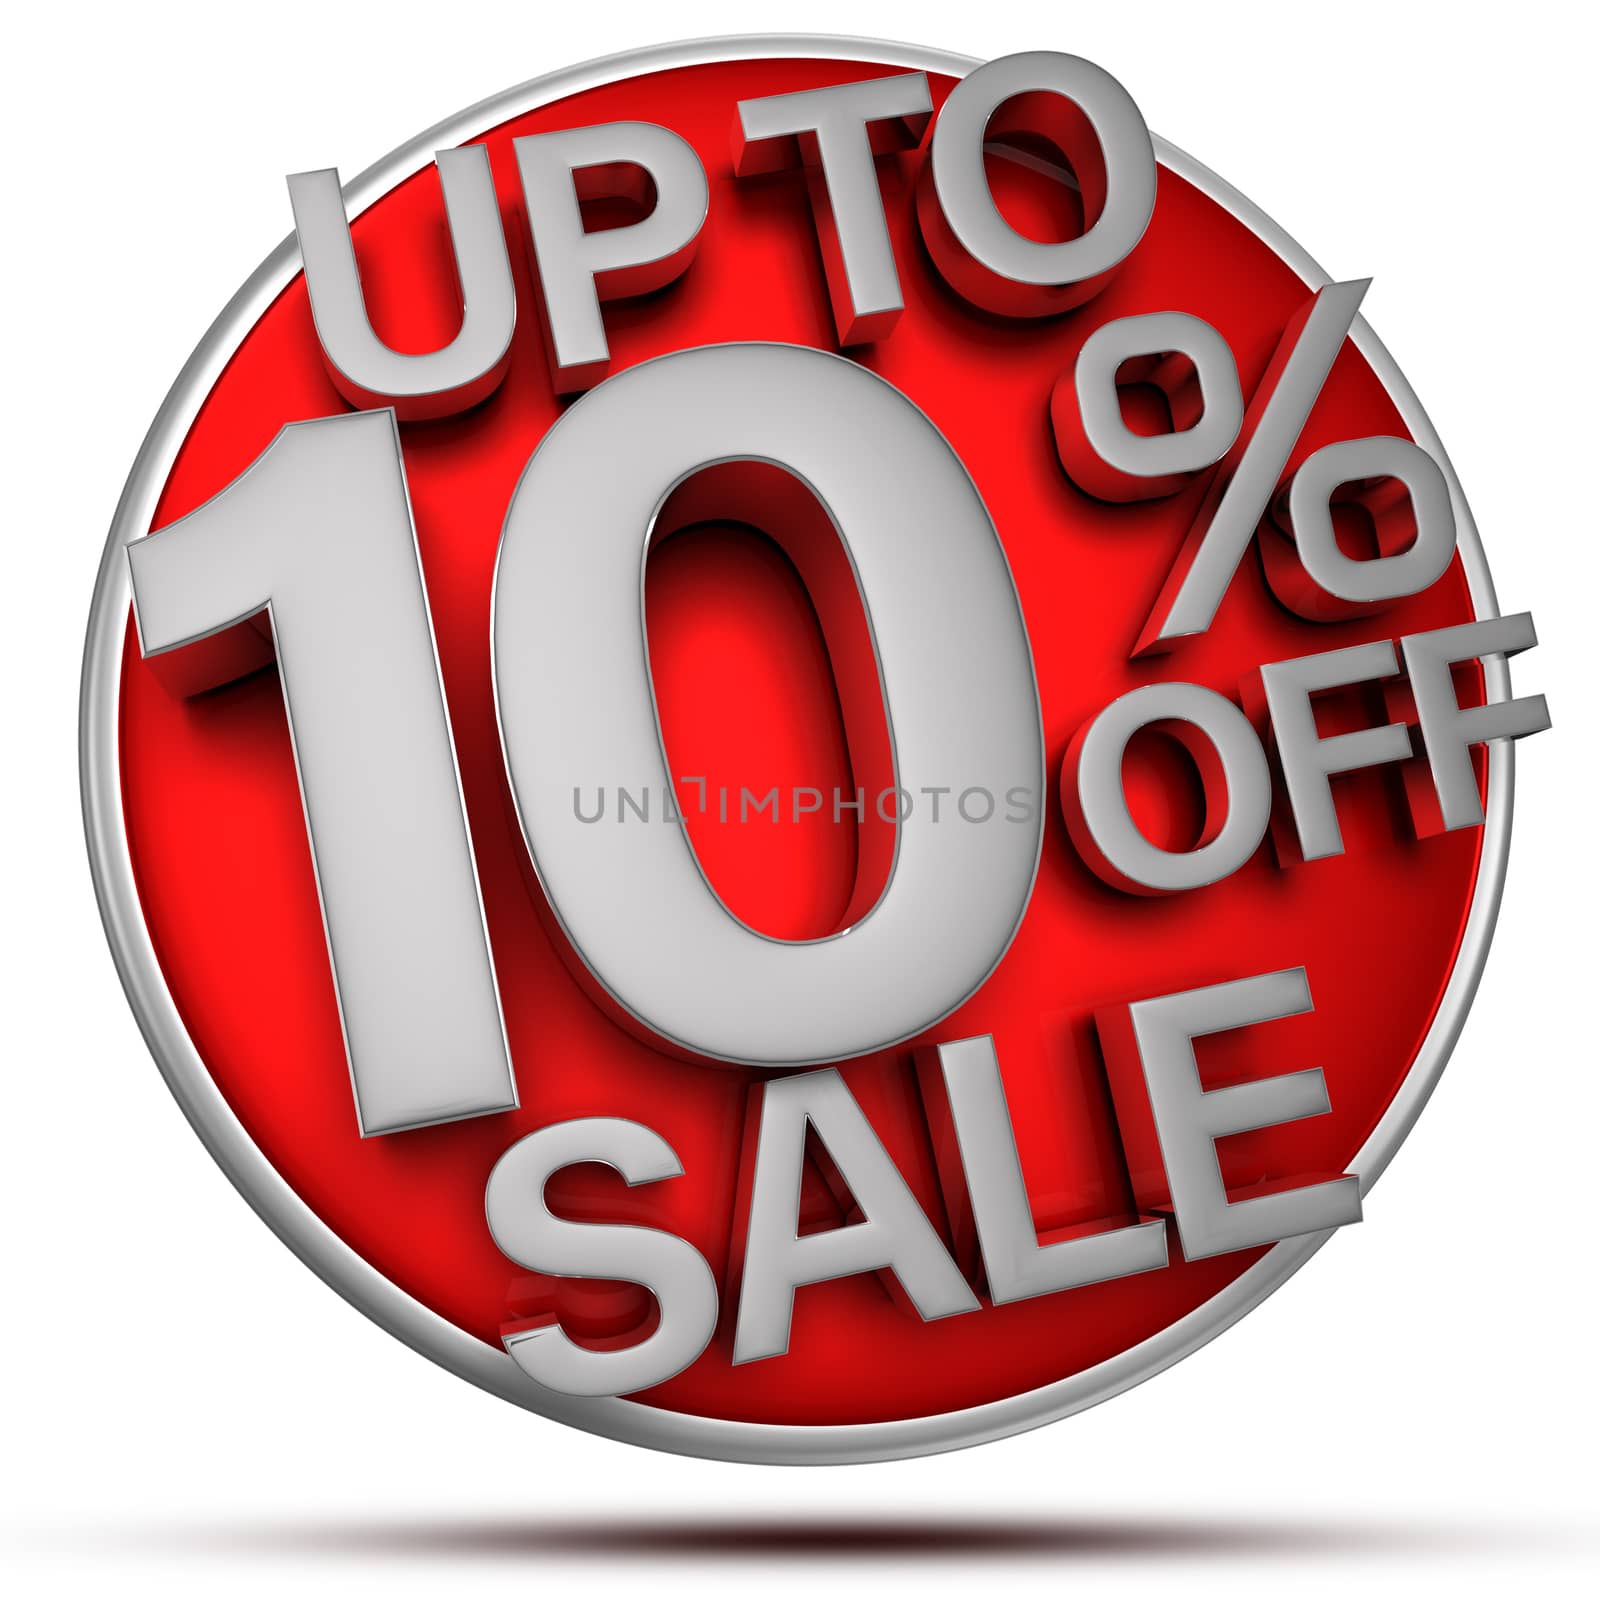 Up to 10% off sale 3d rendering on white background.(with Clipping Path).